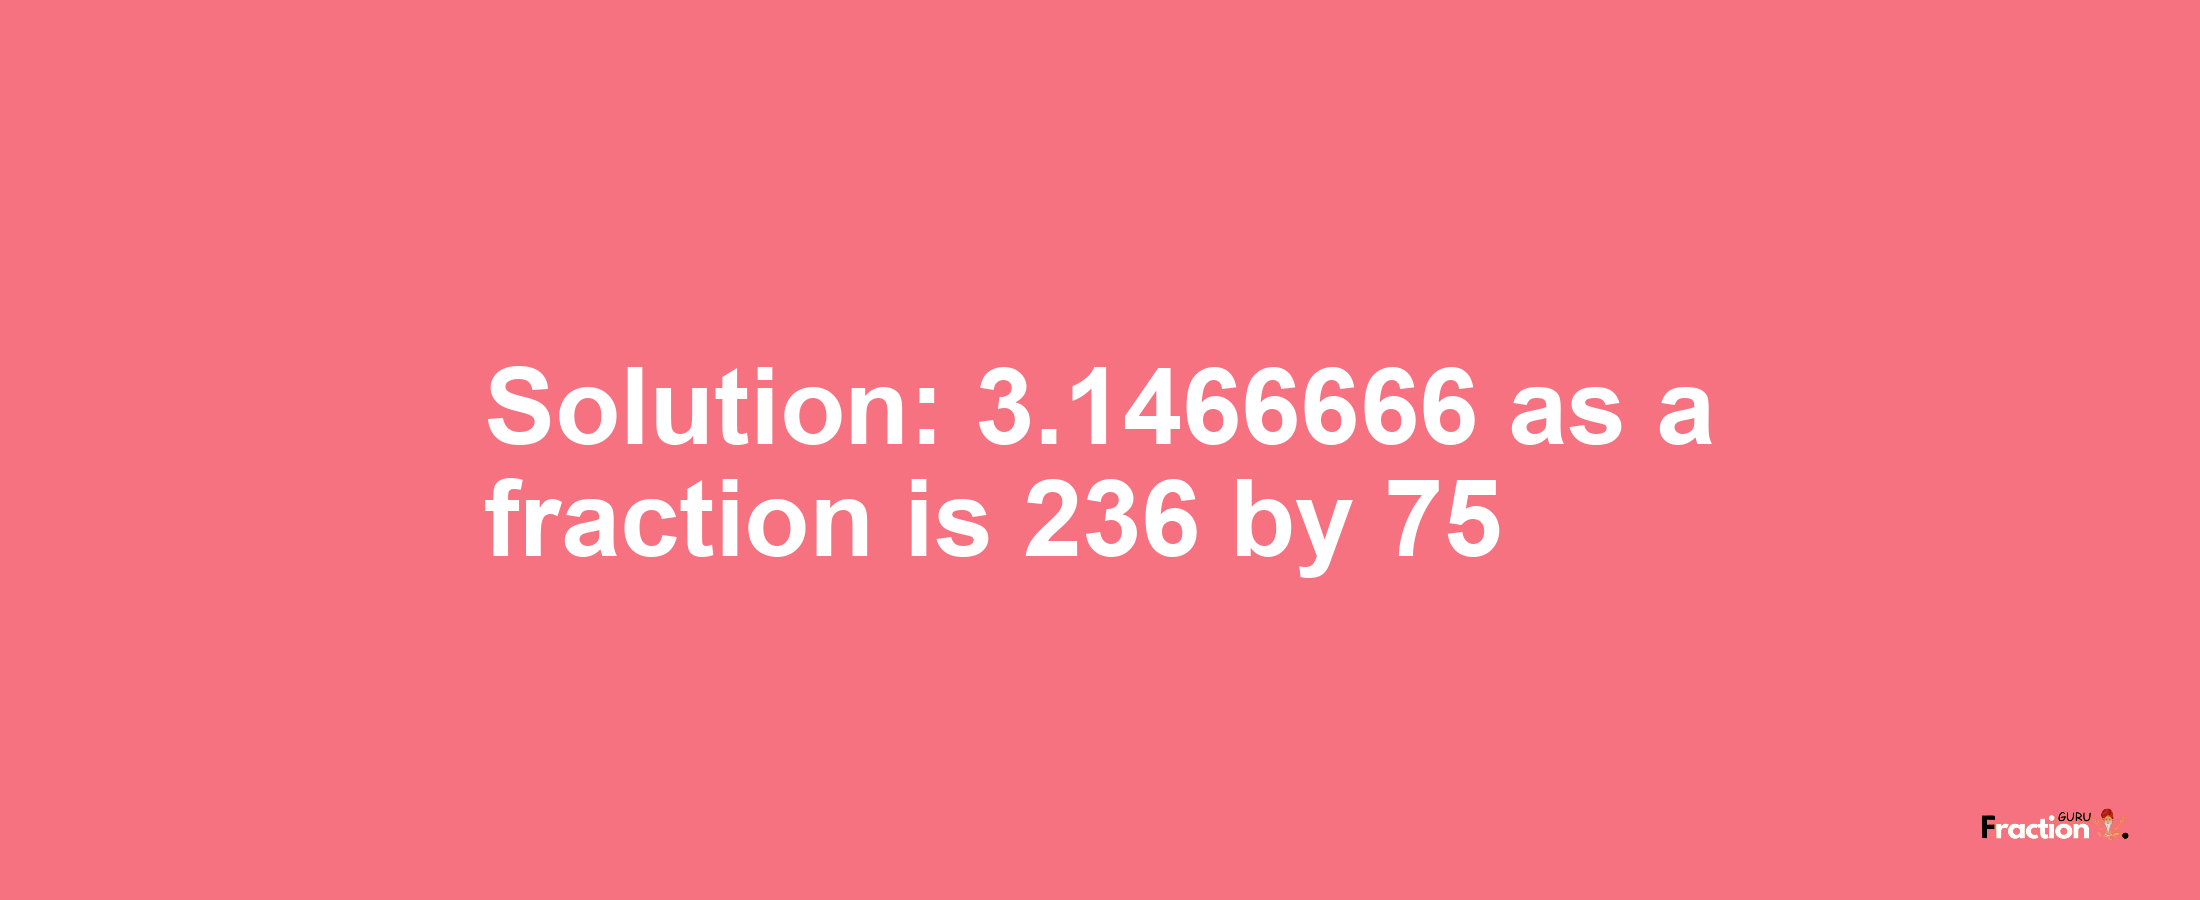 Solution:3.1466666 as a fraction is 236/75